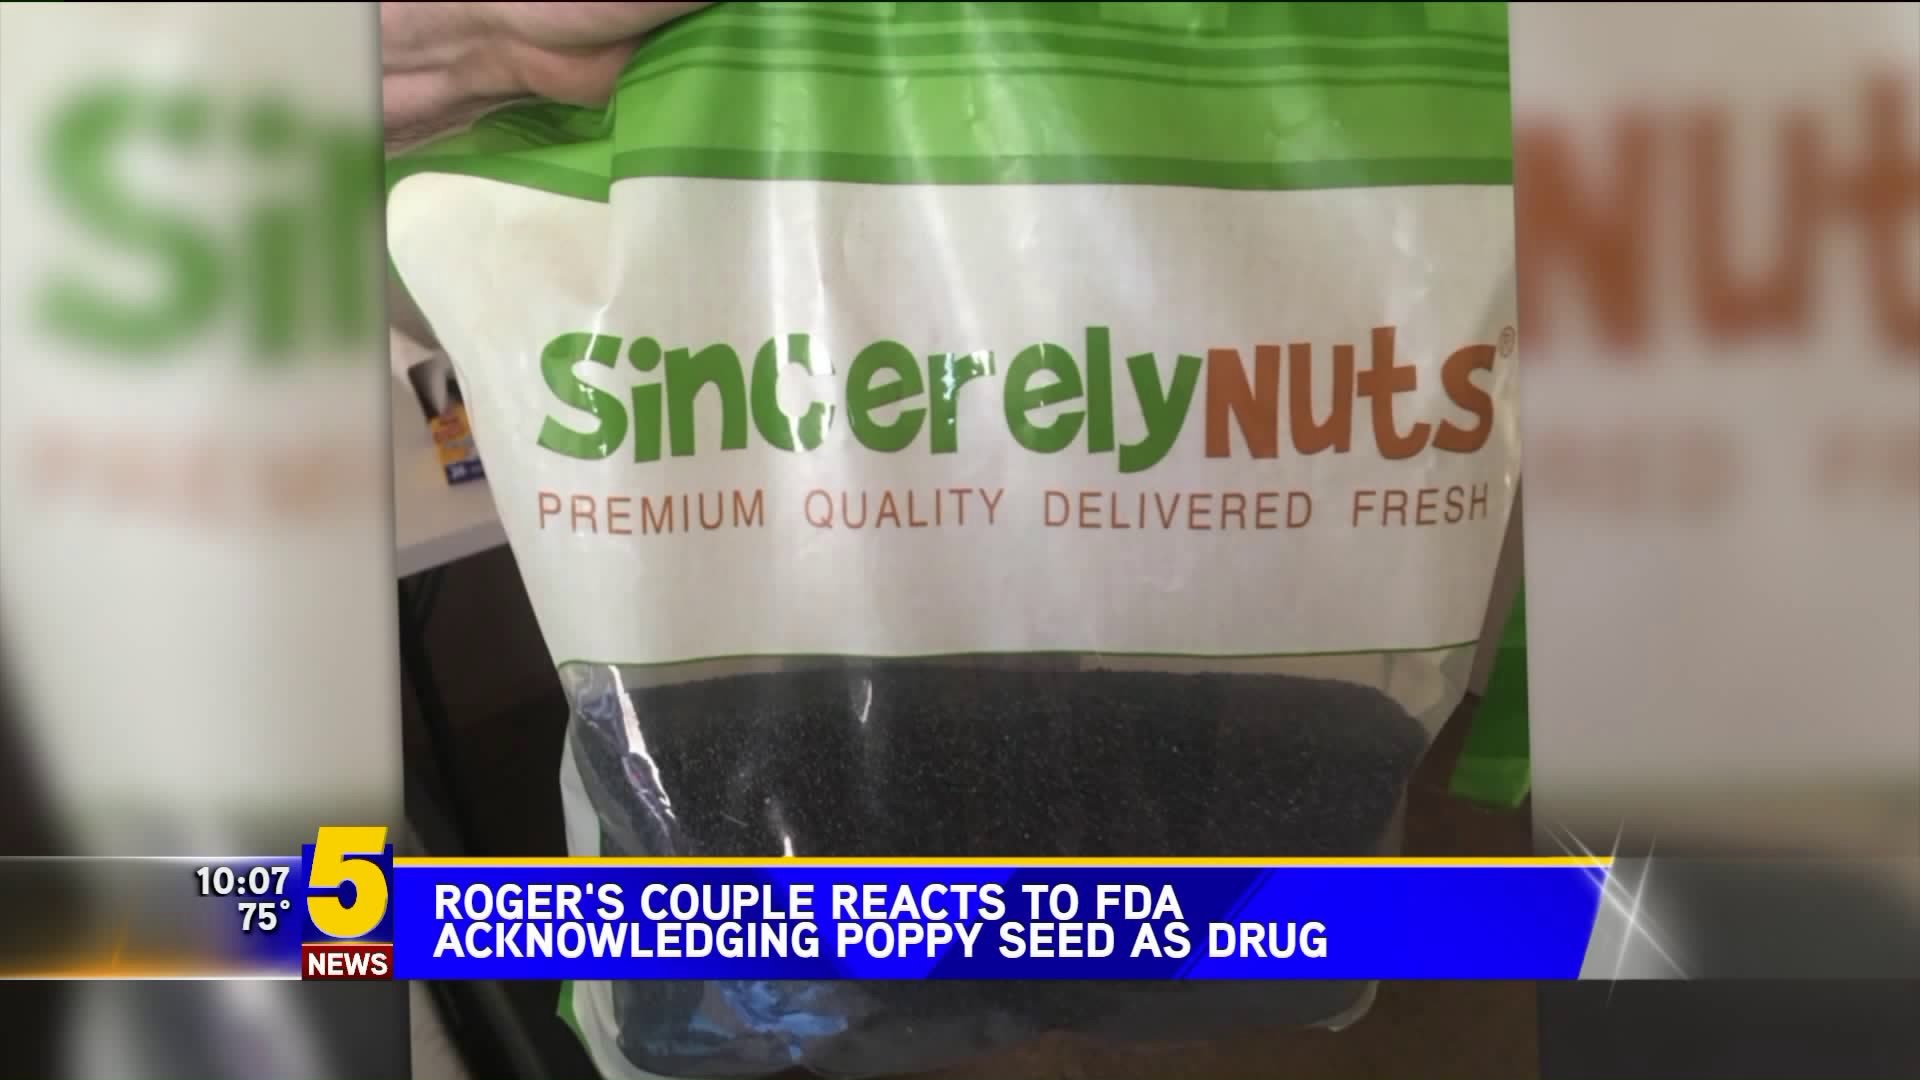 Rogers Couple Reacts To FDA Acknowledging Poppy Seed As Drug